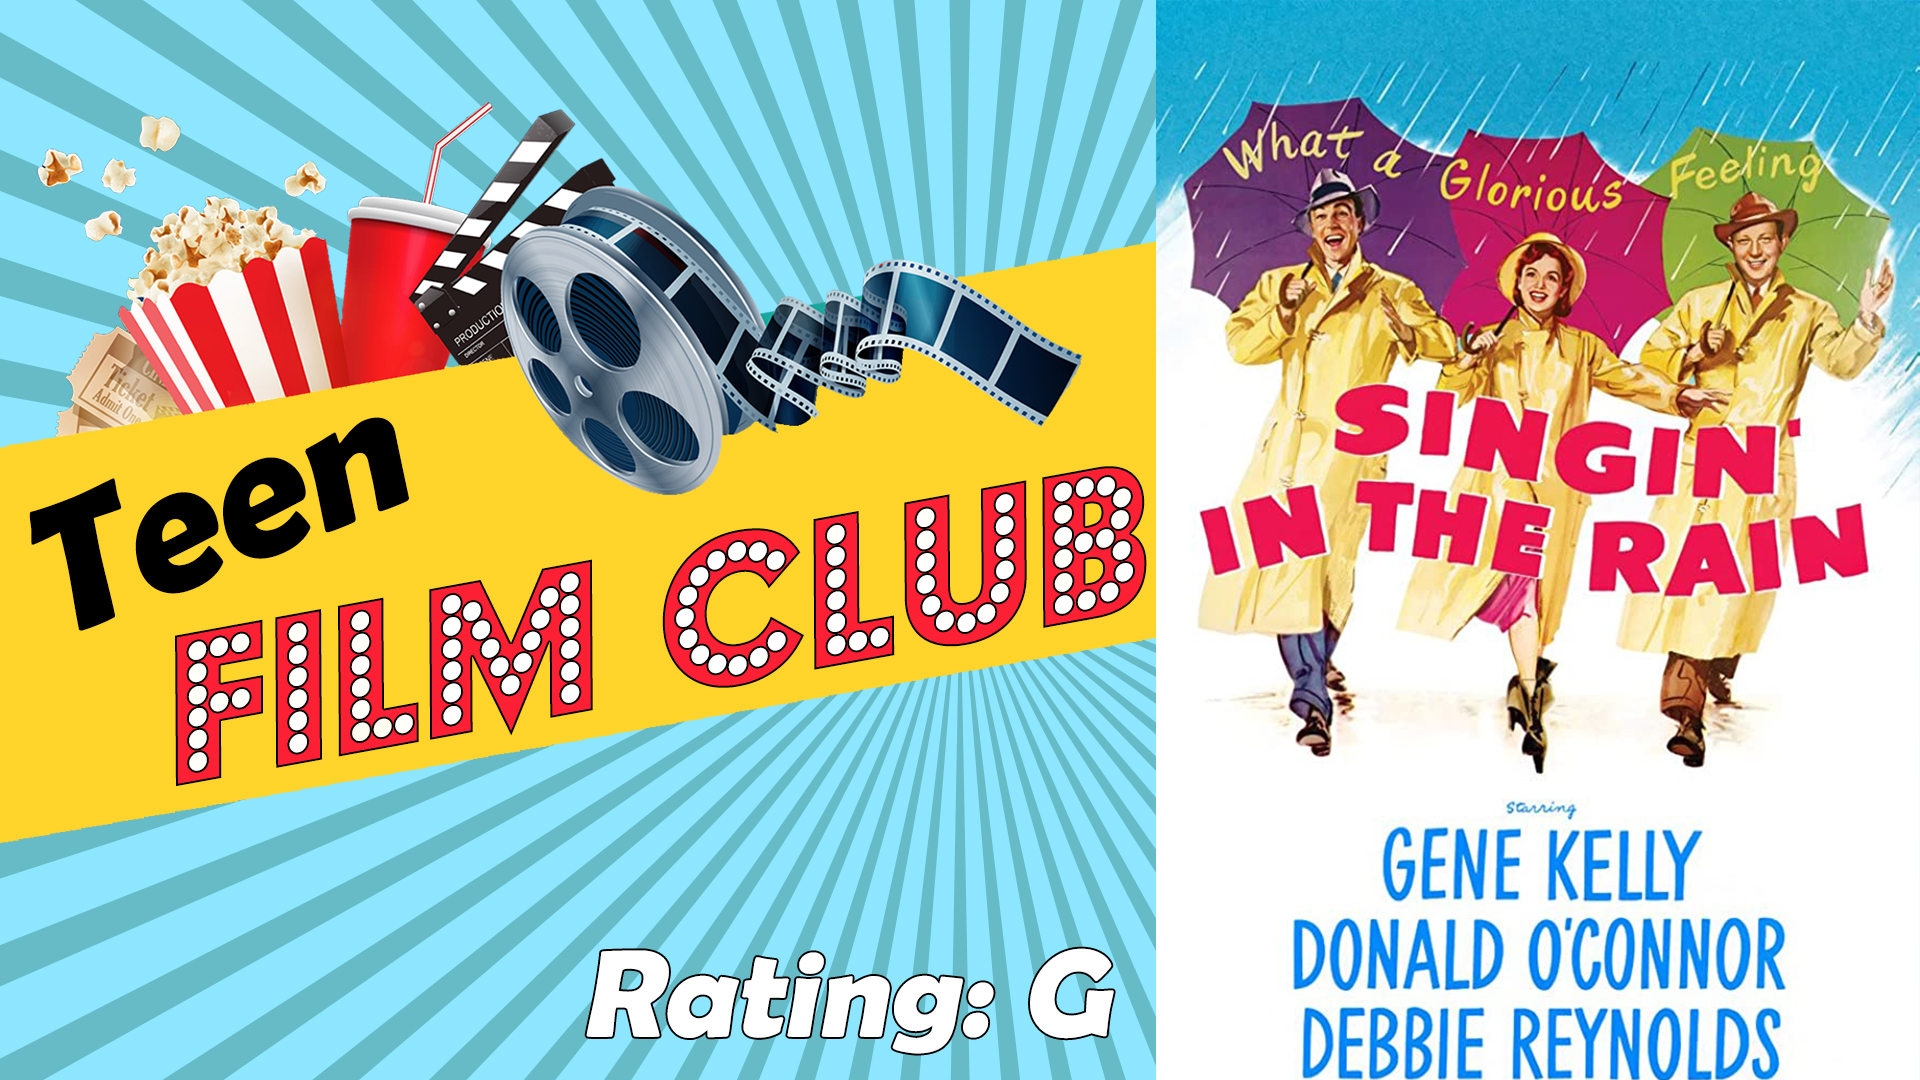 Image reads "Teen Film Club" against a gold banner on a blue sunburst background. A movie reel, cup, popcorn container, and tickets are on the top of the banner. A popcorn bucket with tickets in the bucket are in the bottom right corner. The movie poster for "Singing in the Rain" is to the right of the title.